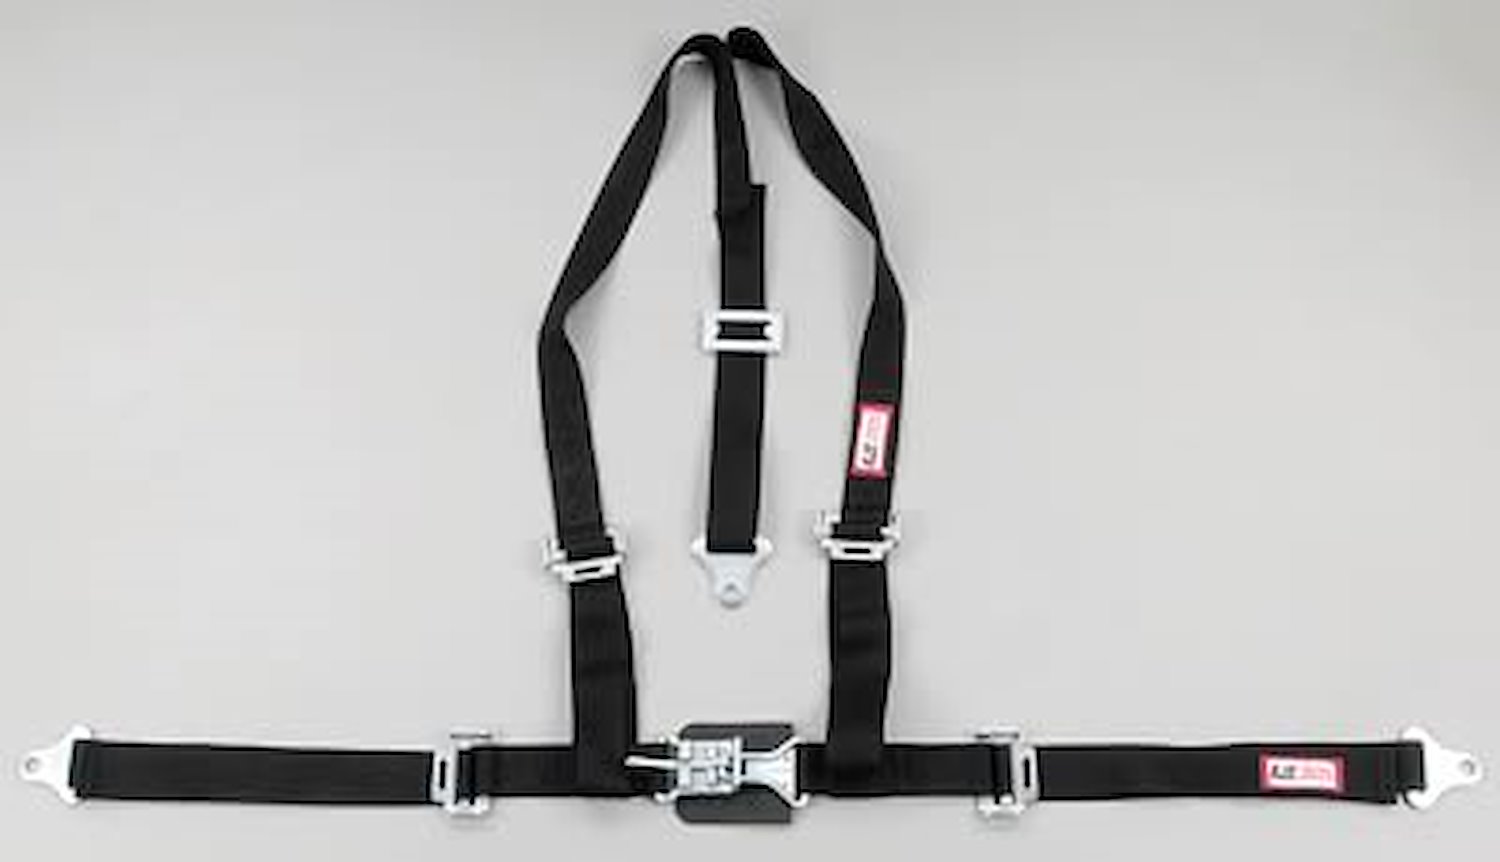 NON-SFI L&L HARNESS 3 PULL DOWN Lap BELT SEWN IN 2 S.H. Y FLOOR Mount w/STERNUM STRAP ALL WRAP ENDS BLUE